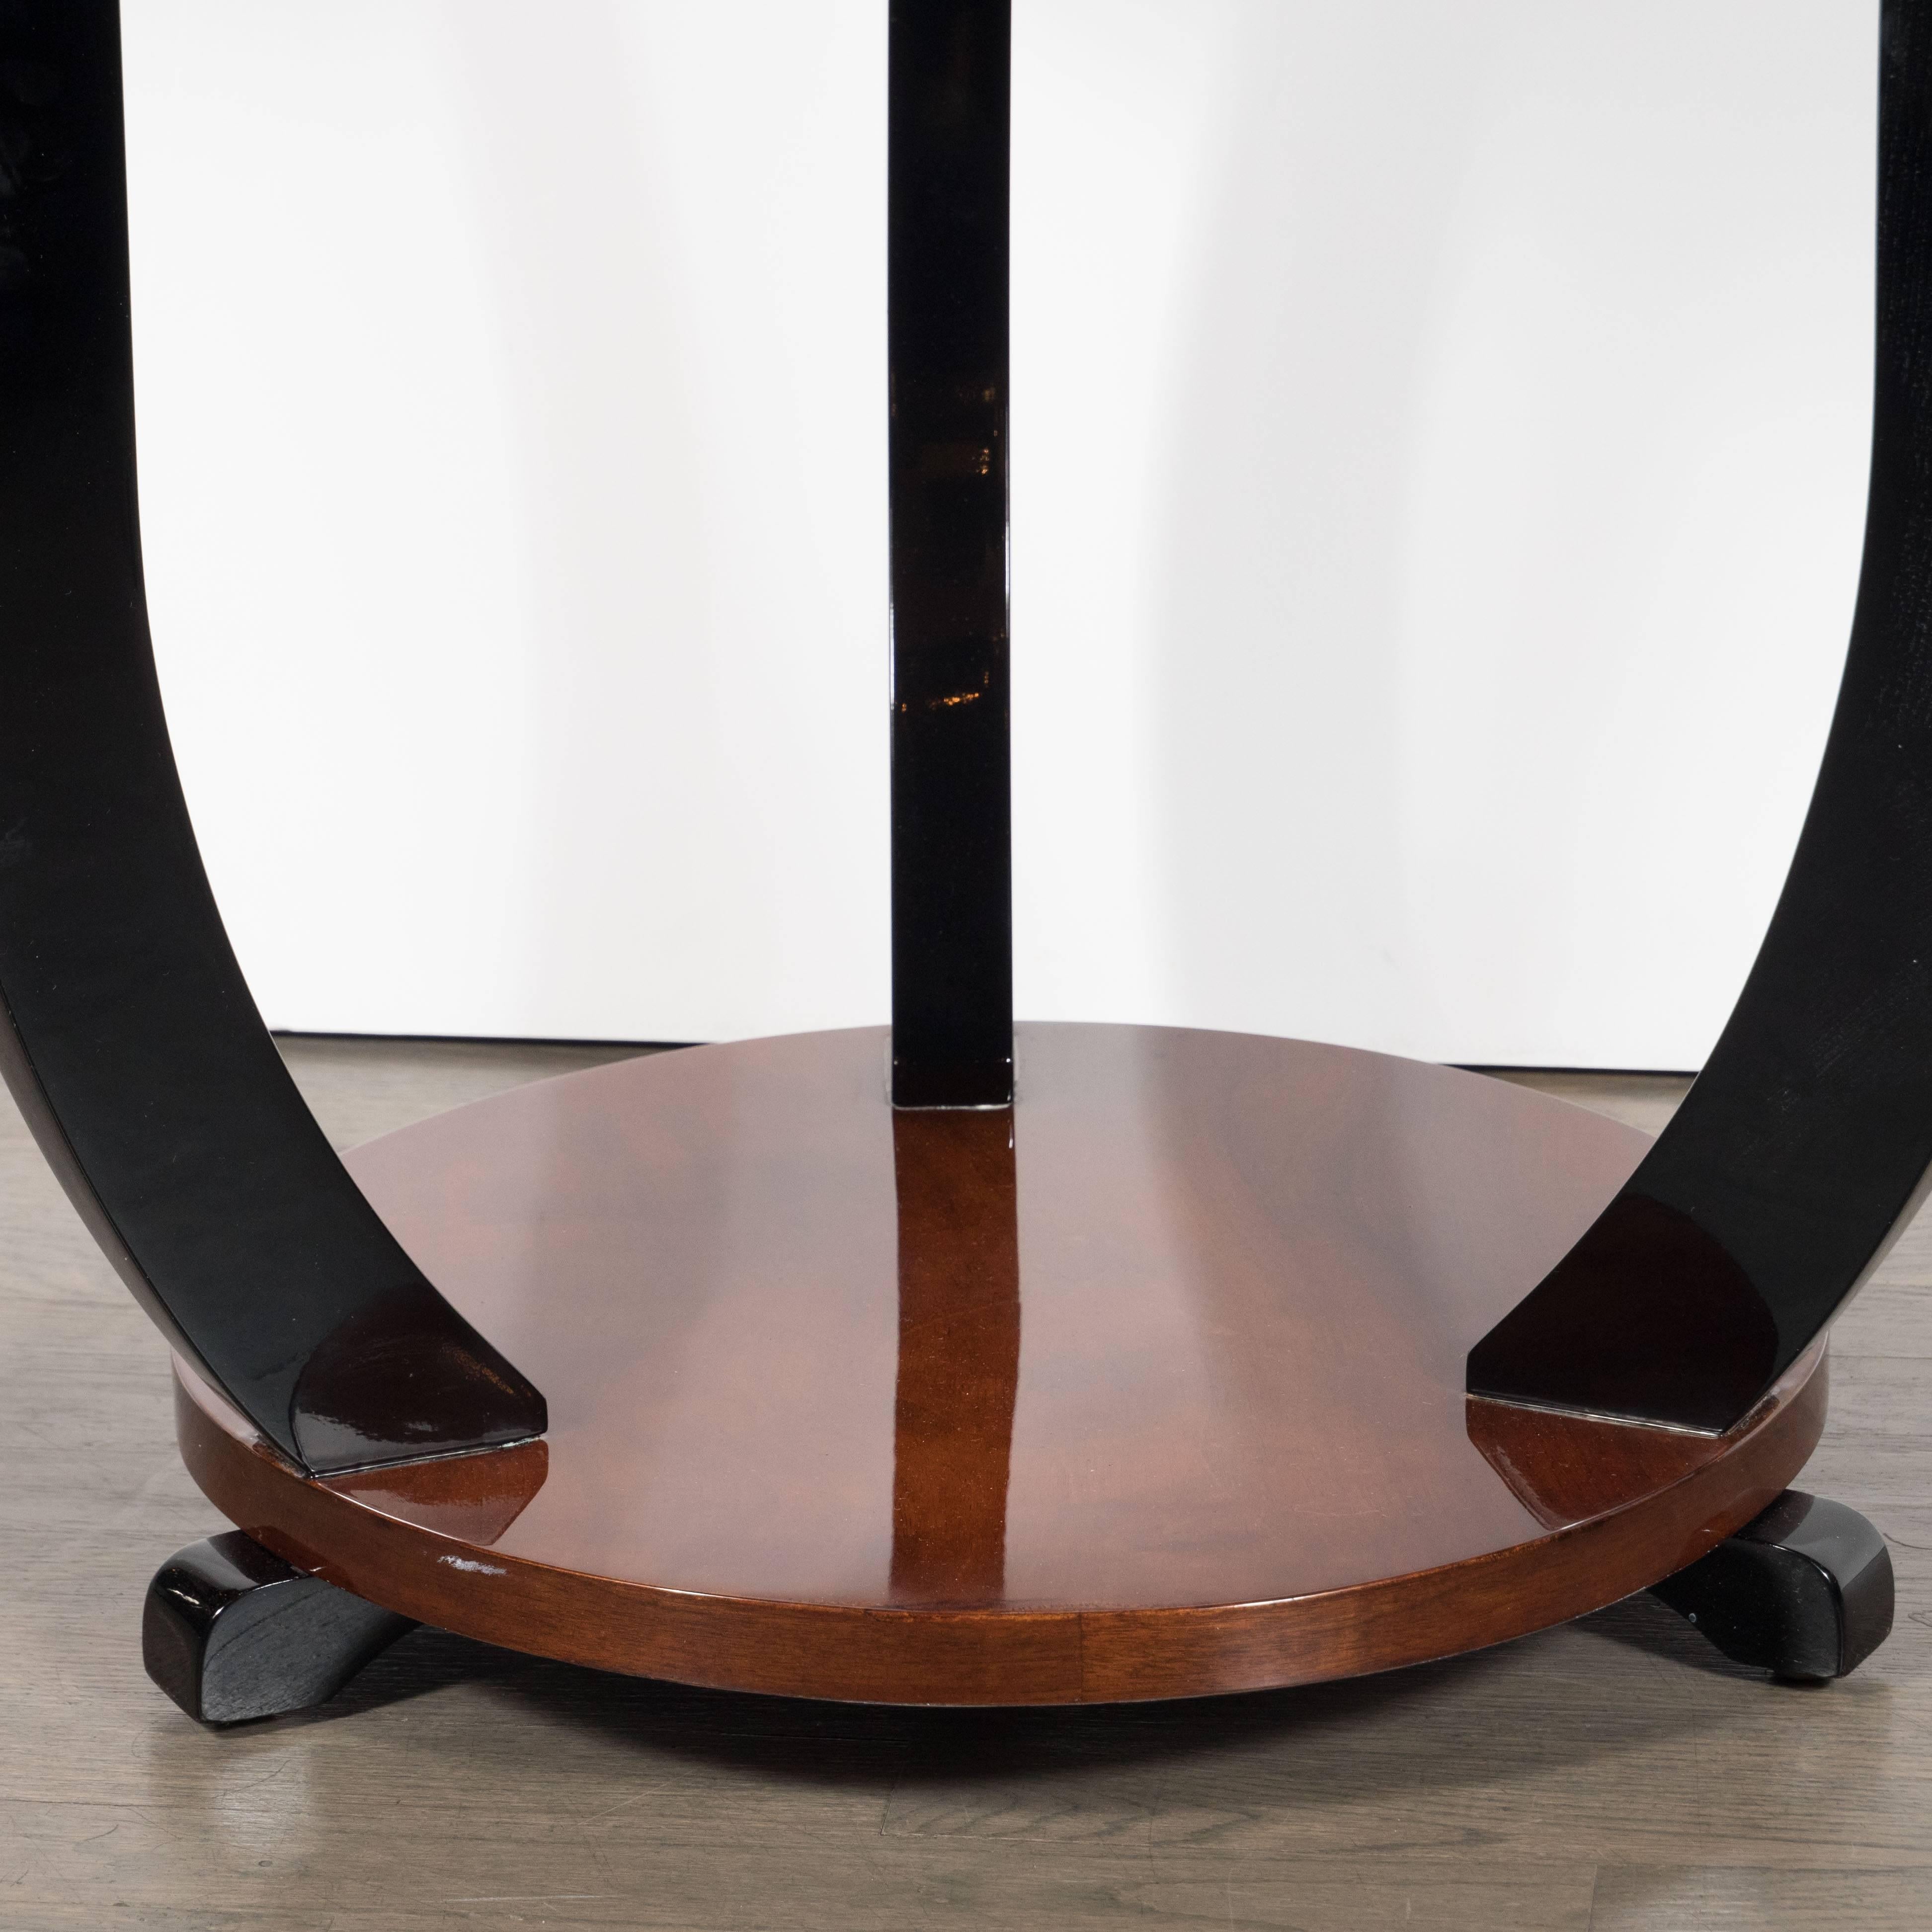 French Art Deco Two-Tiered Bookmatched Walnut & Black Lacquer Gueridon Table For Sale 3